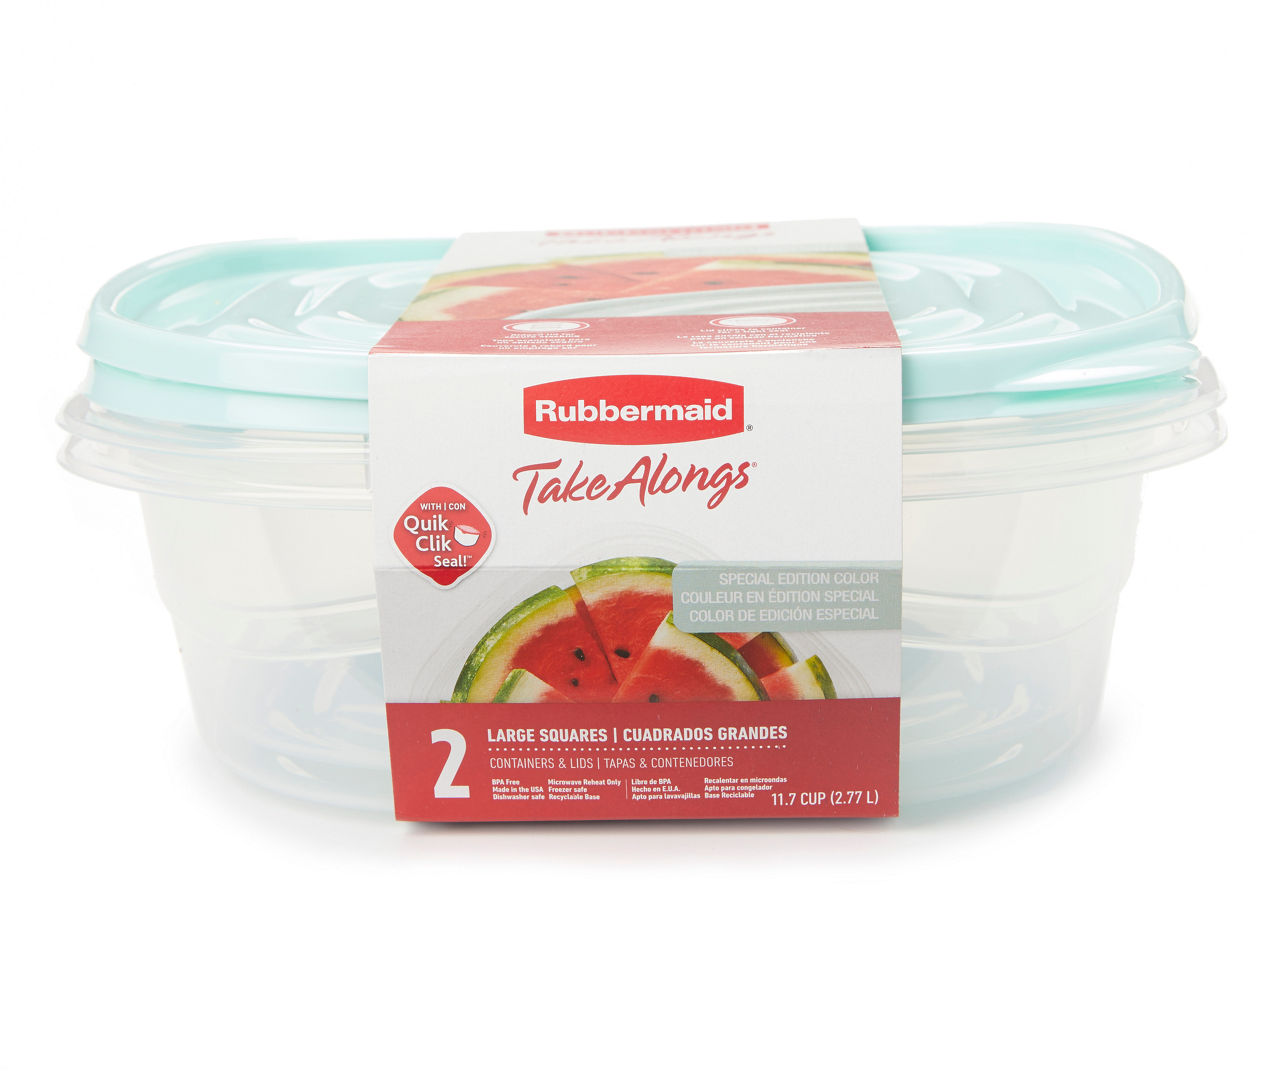 RUBBERMAID Take Alongs Containers & Lids Pack BPA-Free Plastic -16pcs